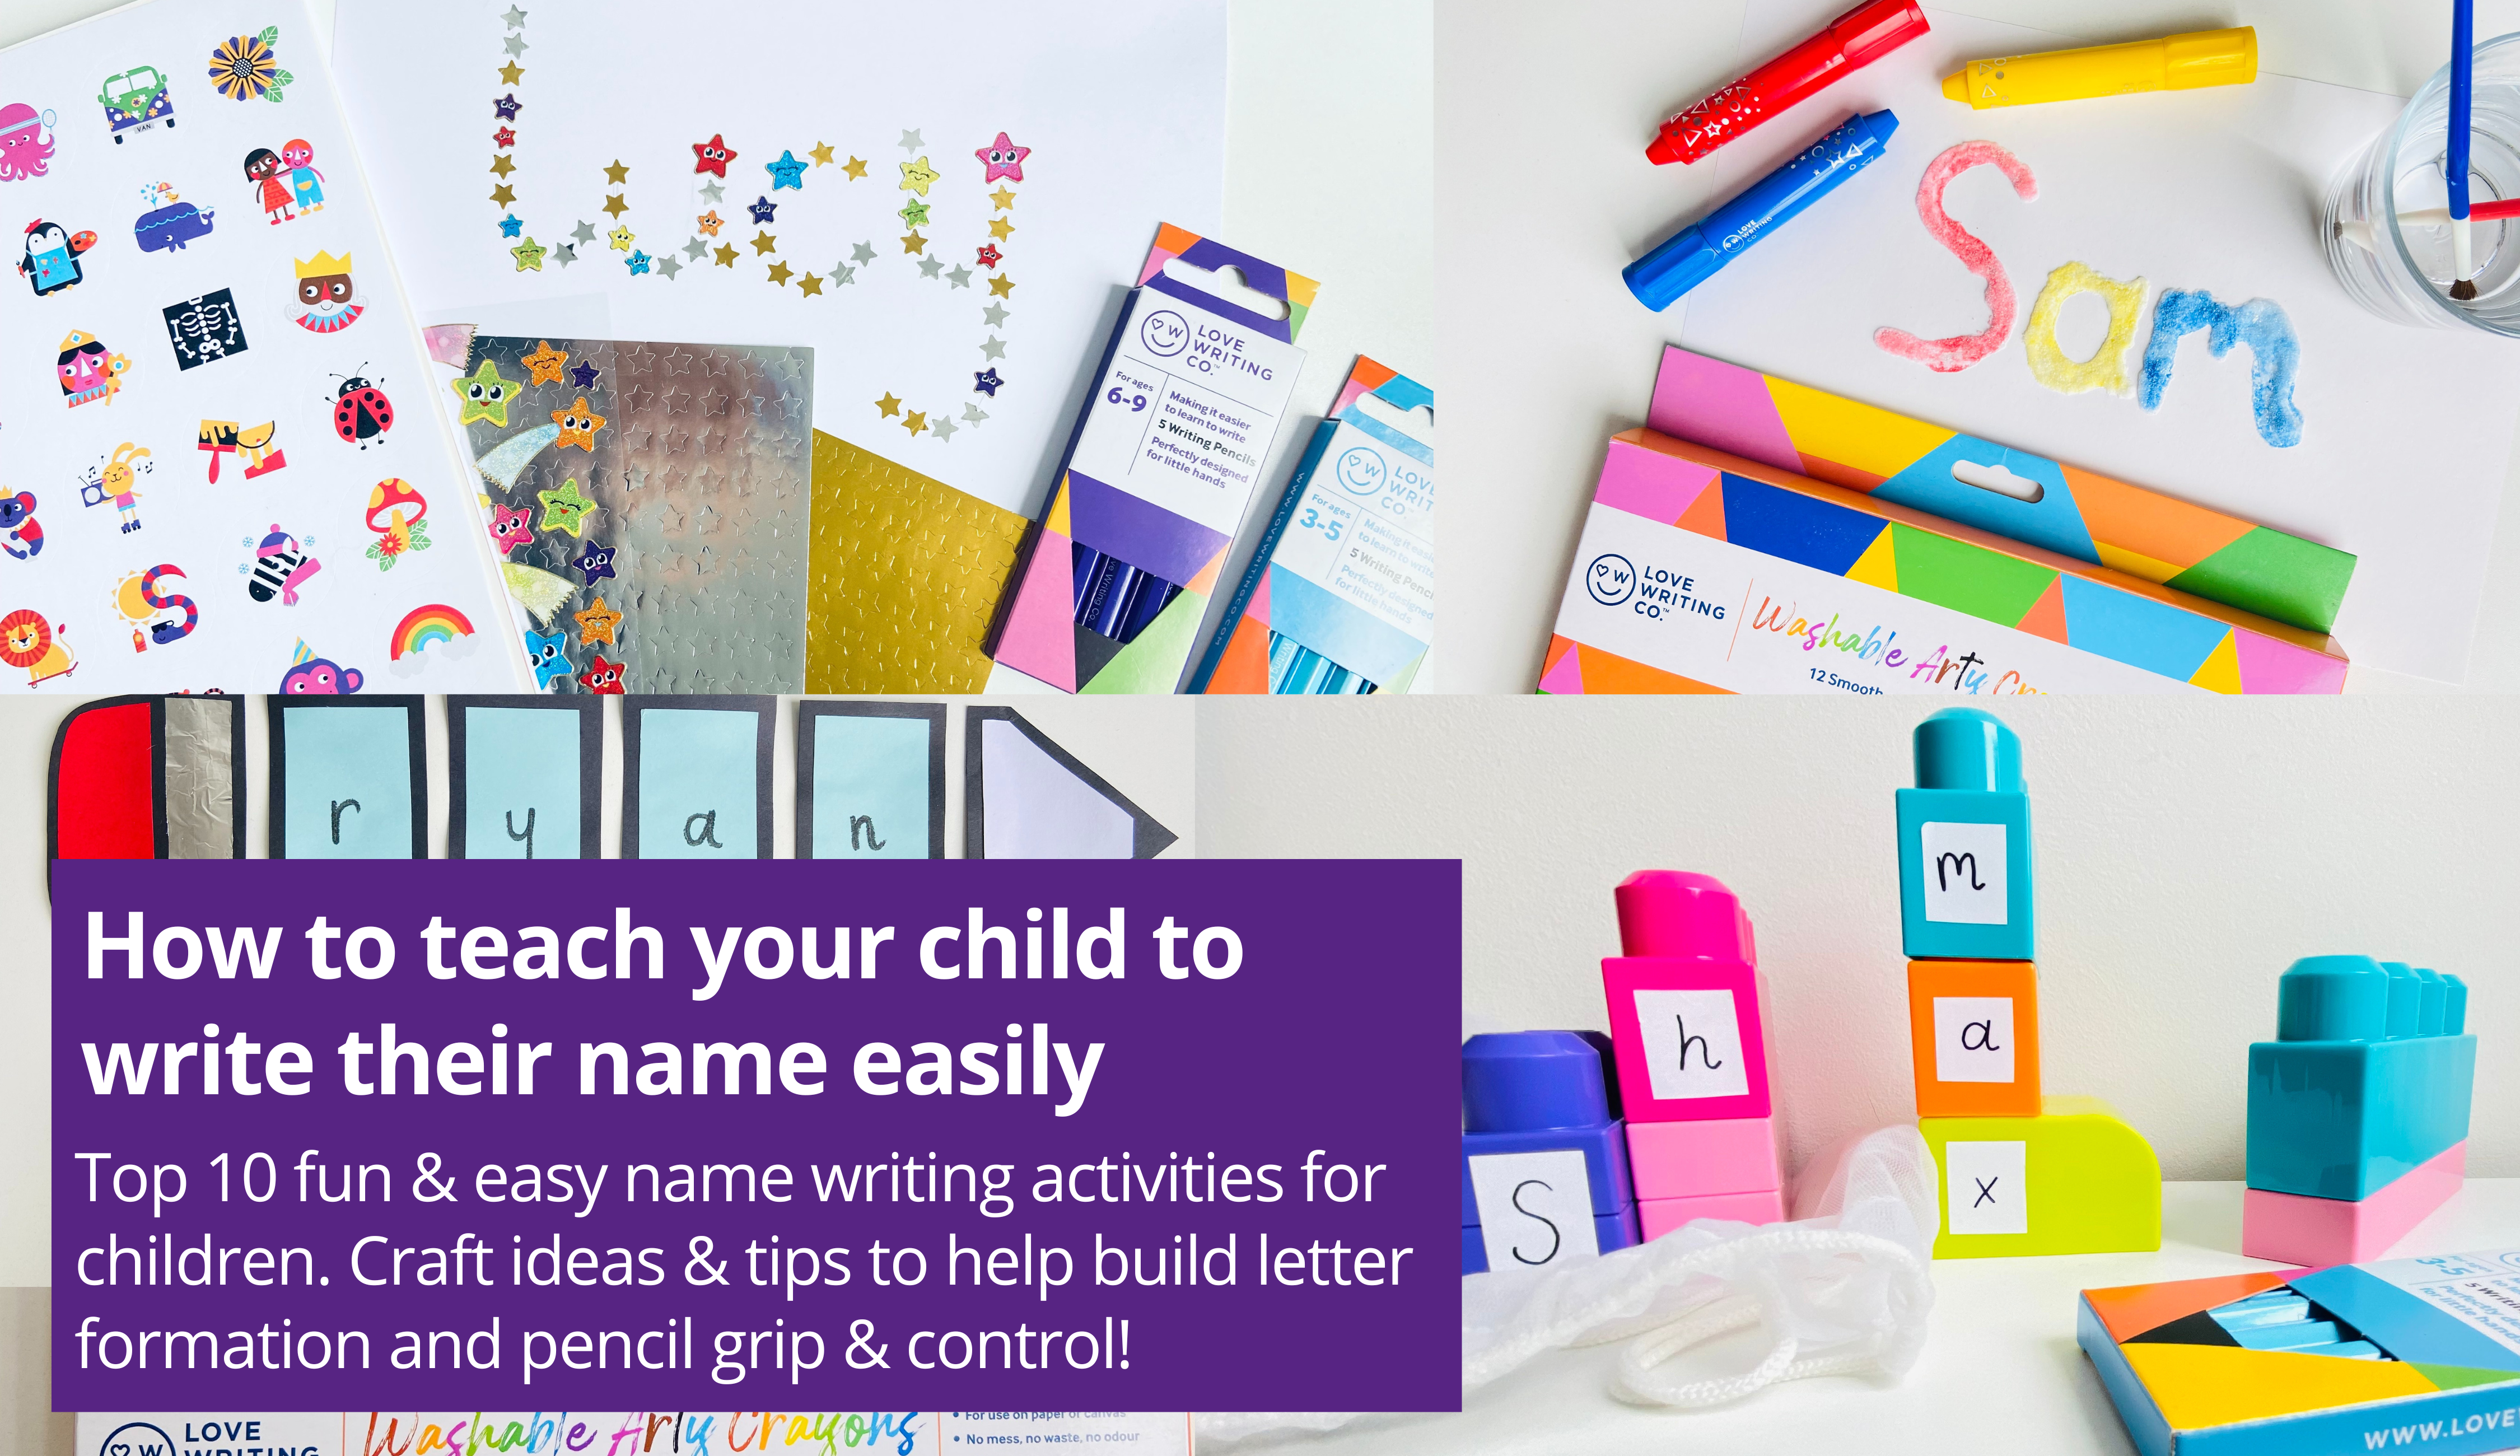 How To Teach Your Child To Write Their Name Easily